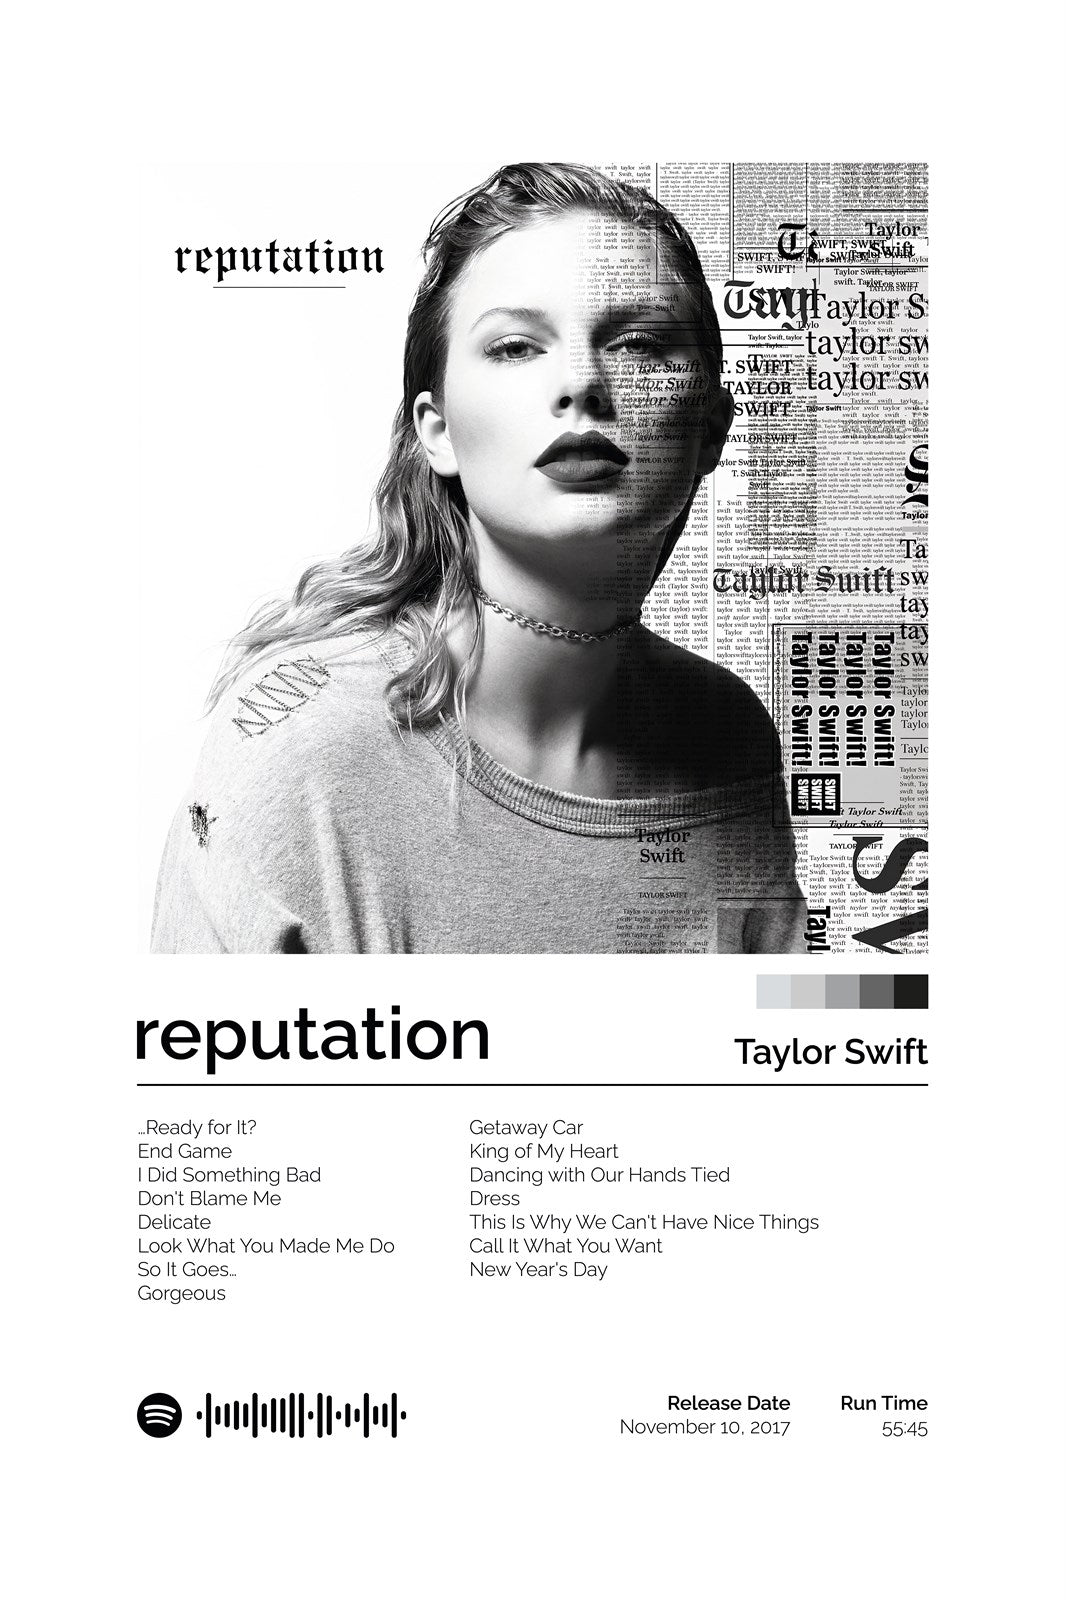 ALBUM POSTER  Taylor swift songs, Taylor swift album cover